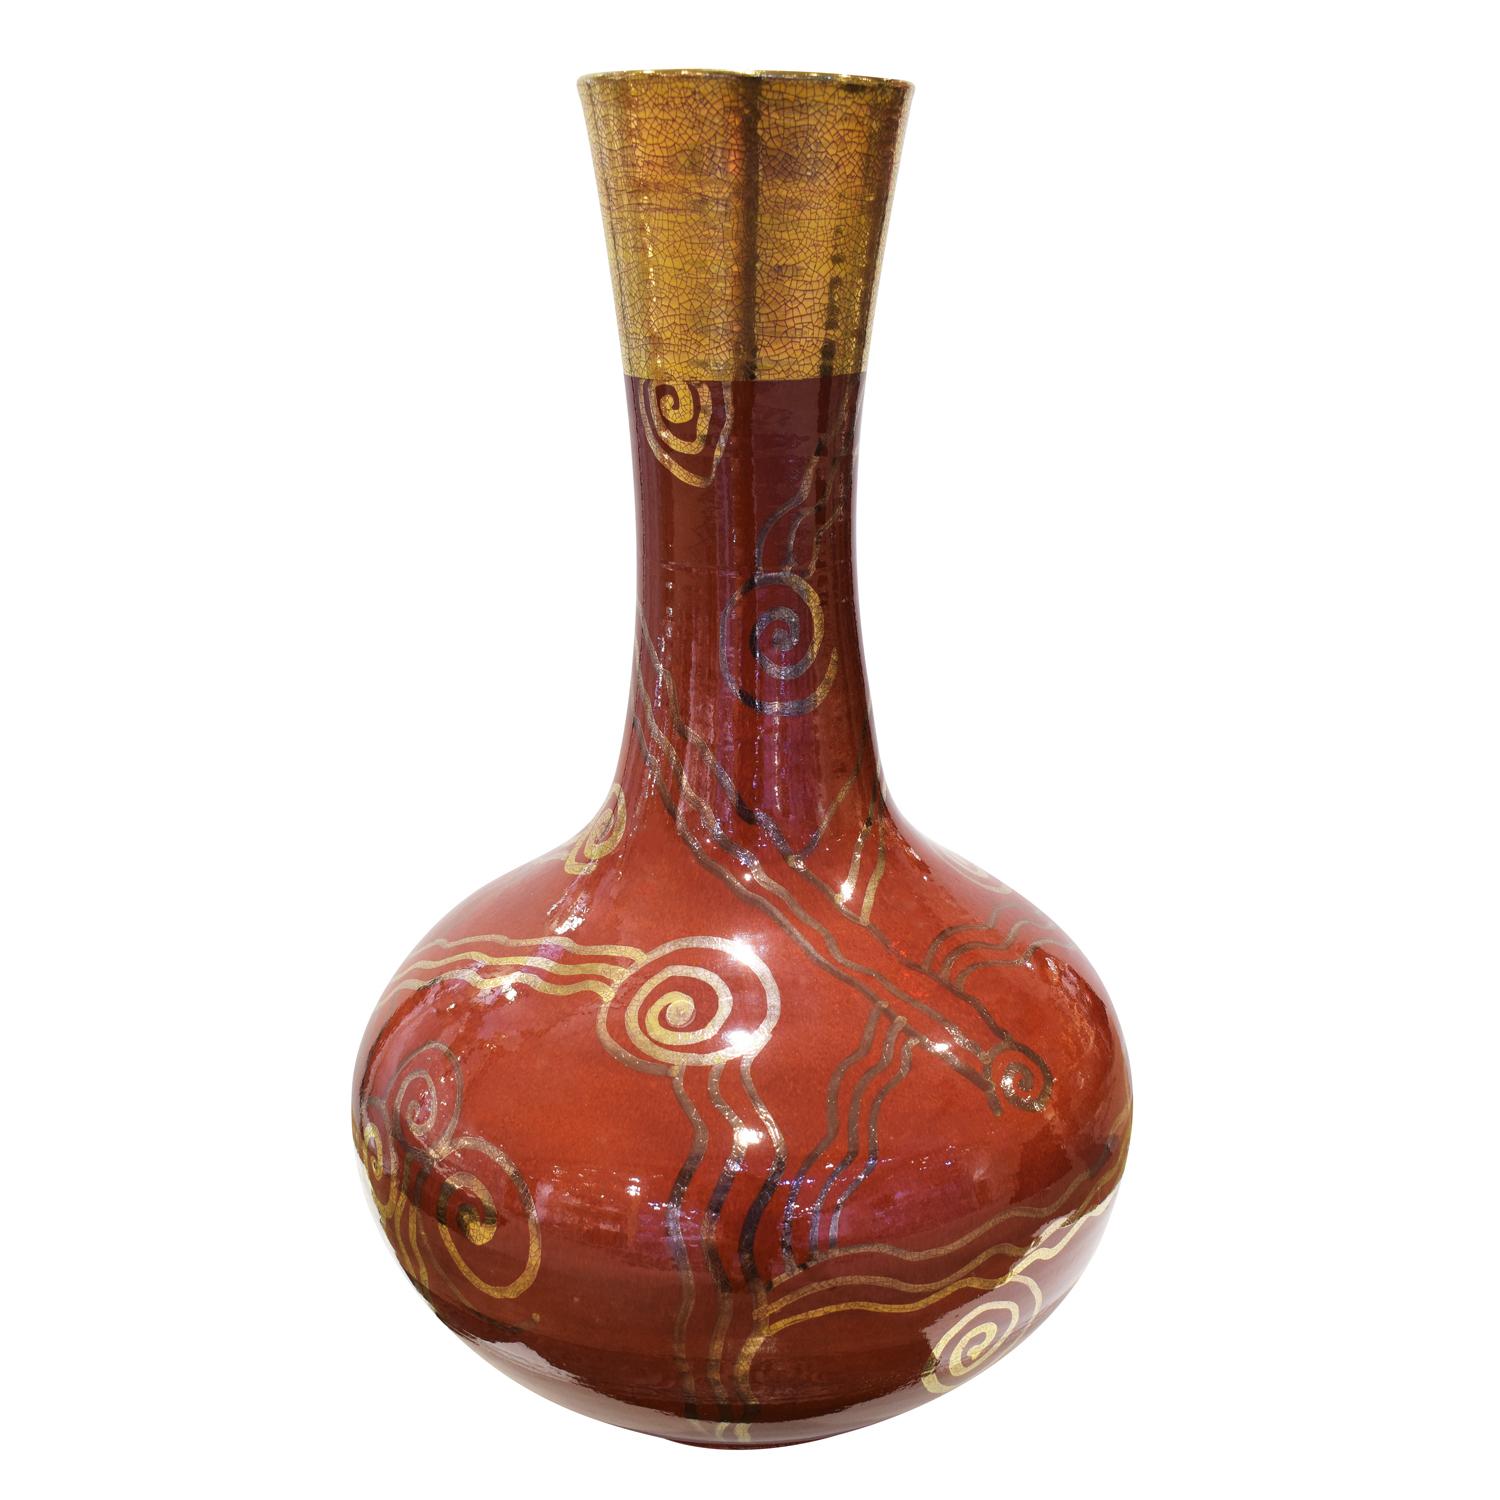 Hand-thrown ceramic vase in Chinese red with applied gold decorative motif by Gary McCloy, American 1970s (signed on the bottom). This vase is impressive and has a lot of visual depth. The combination of Chinese red with gold overlaid is magnificent.